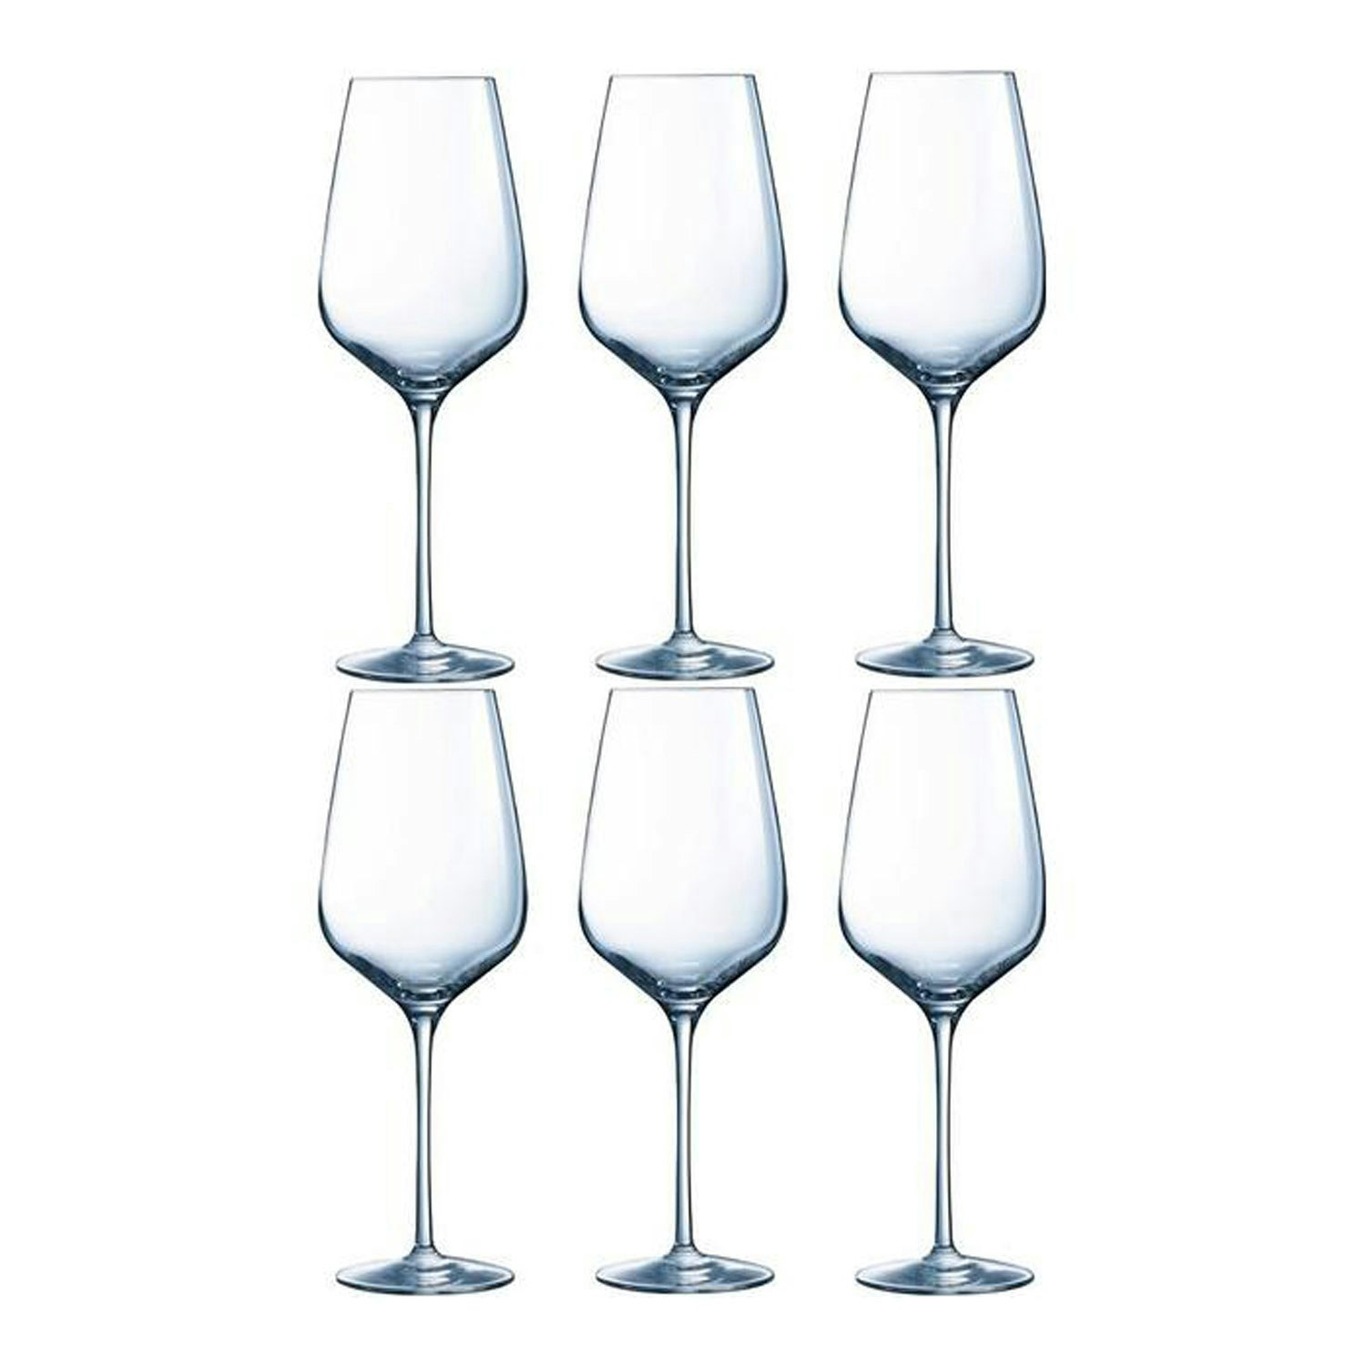 https://royaldesign.com/image/2/chefsommelier-sublym-red-wine-glass-55-cl-6-pack-0?w=800&quality=80